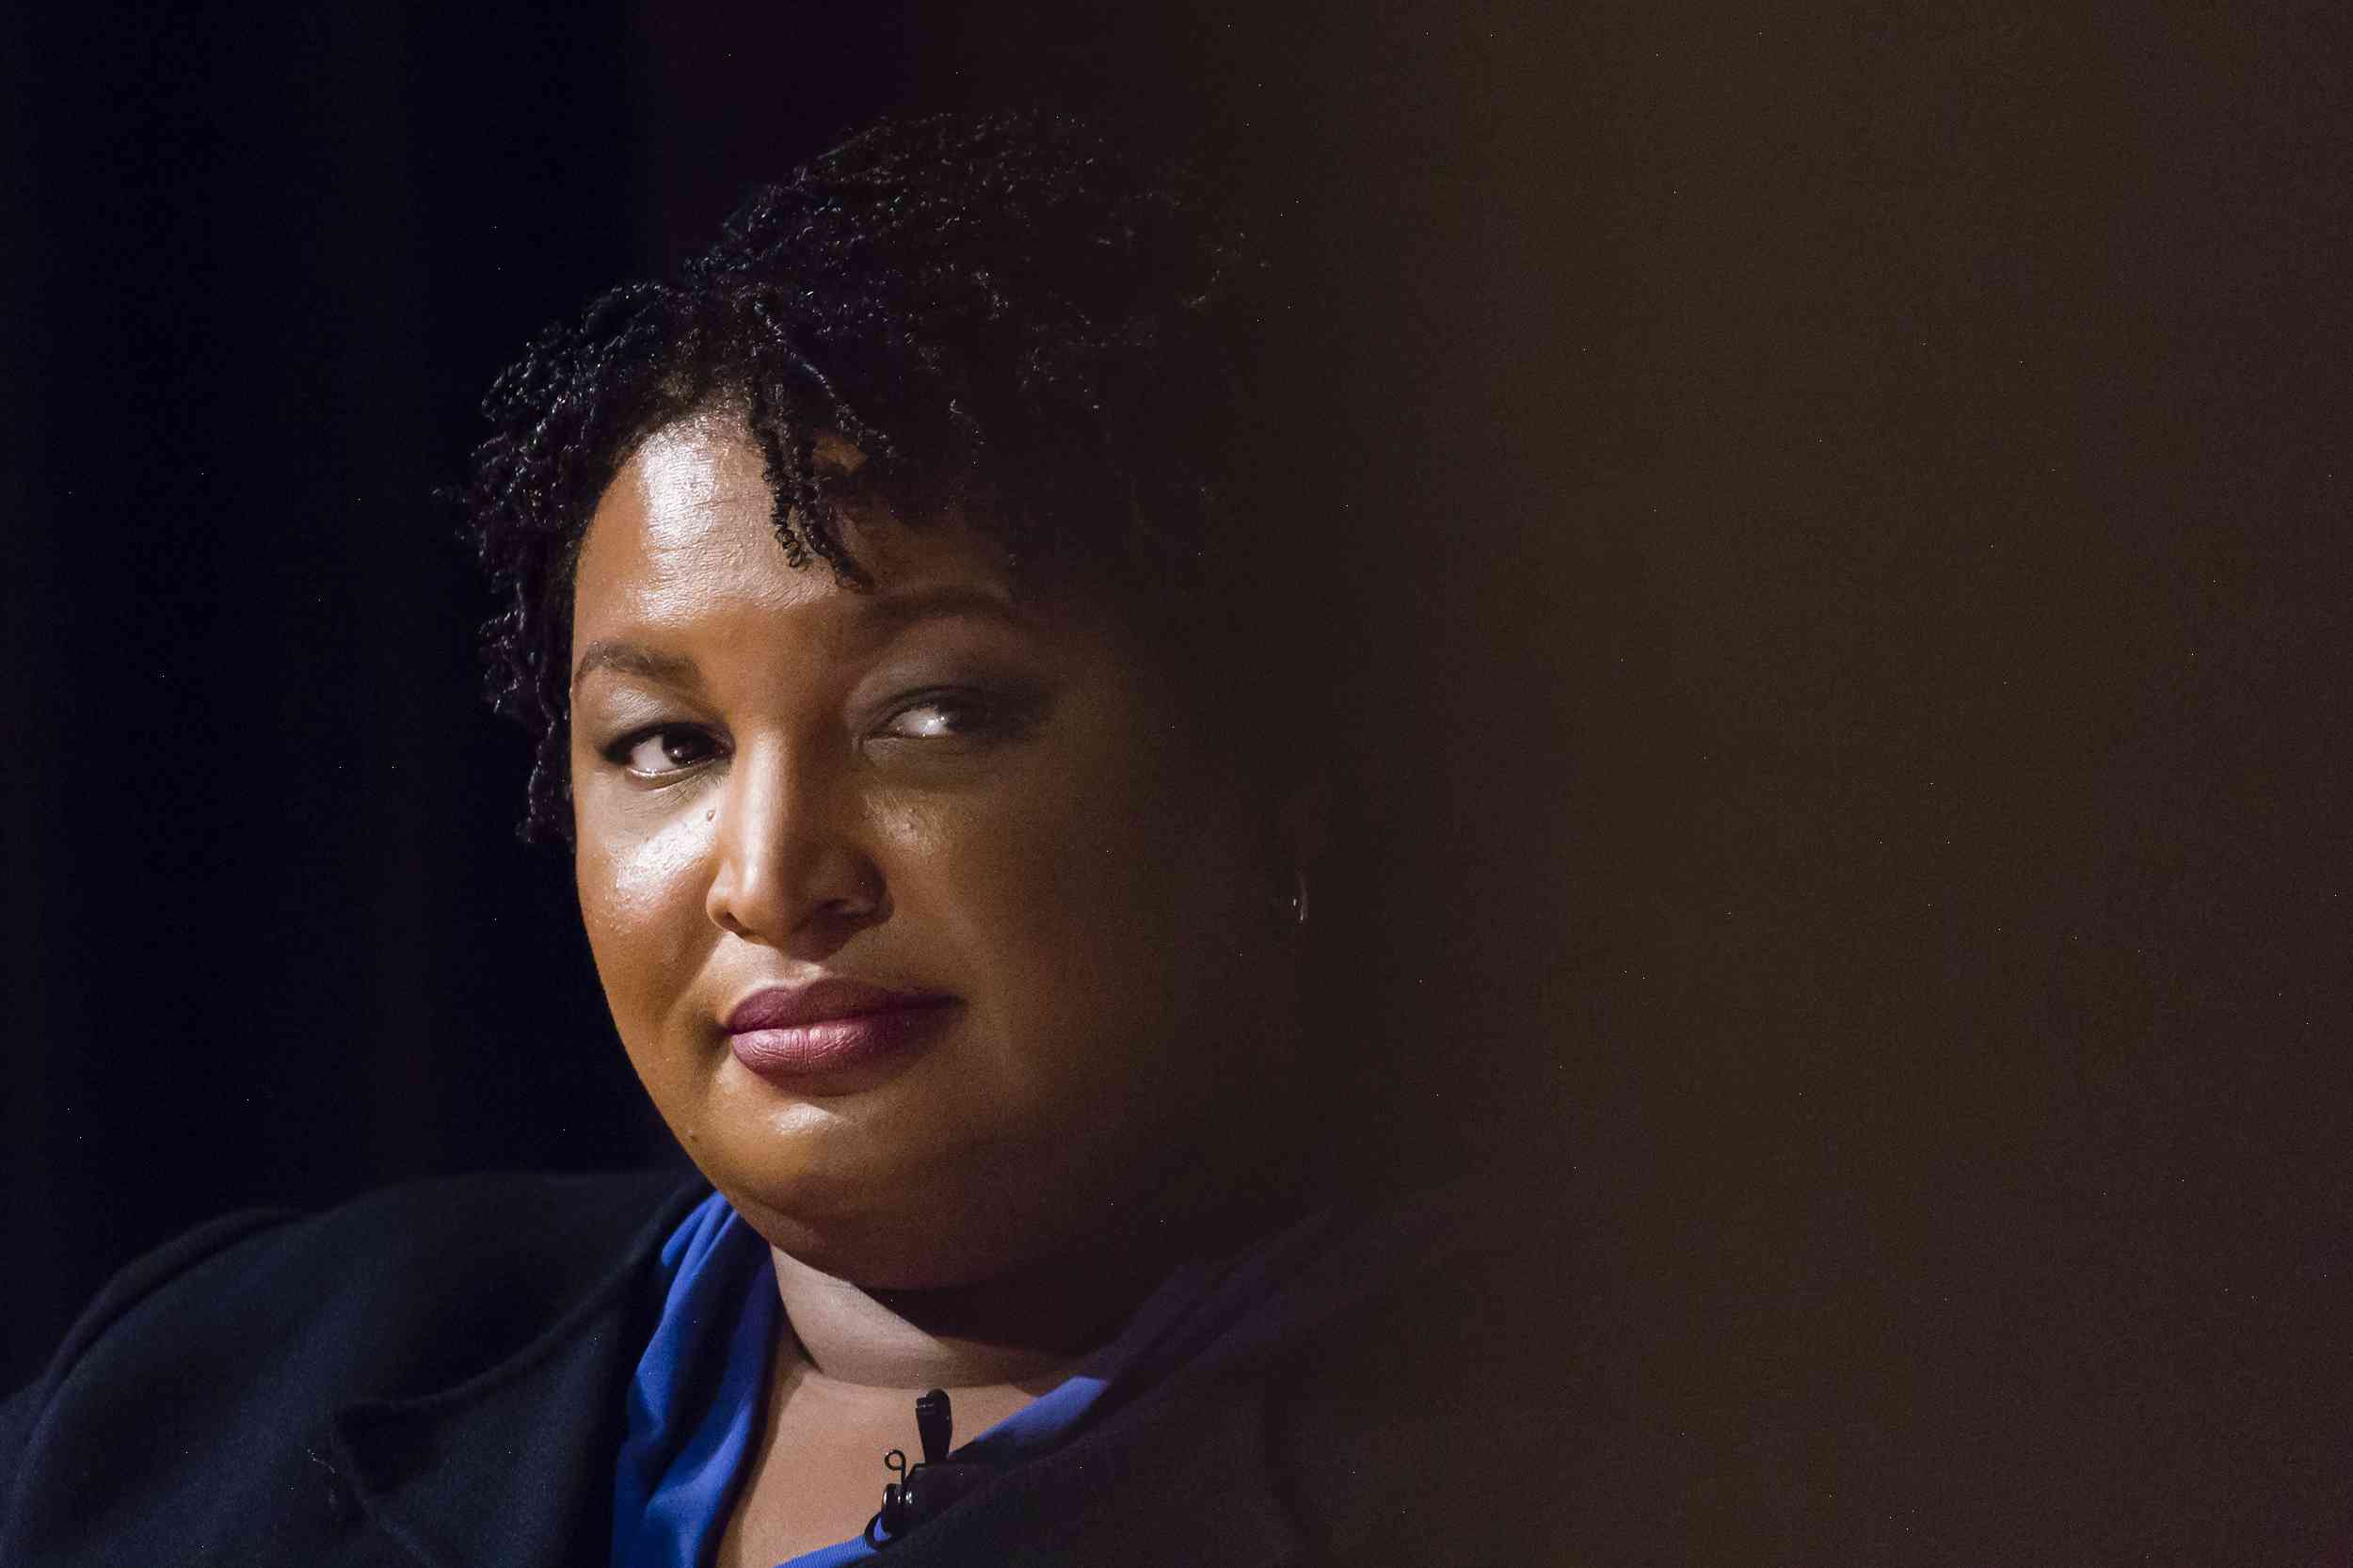 Election 2018: Stacey Abrams concedes defeat to Brian Kemp